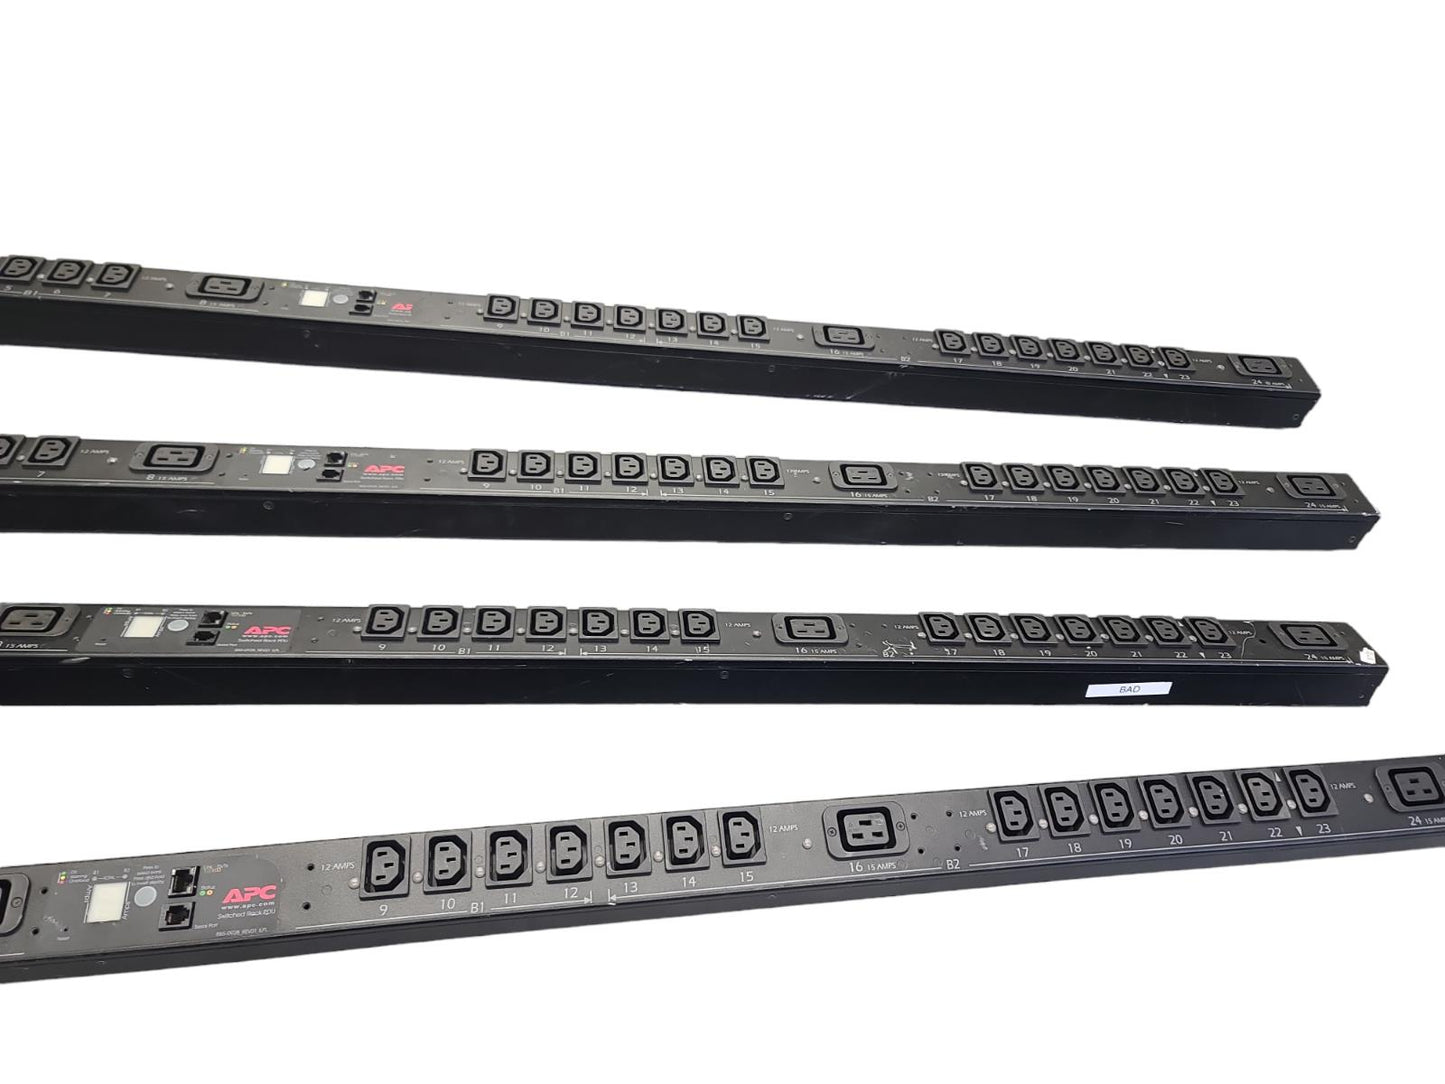 Lot of 4. APC AP7941 SWITCHED RACK PDU 24 OUTLET 200-240 VAC 24A